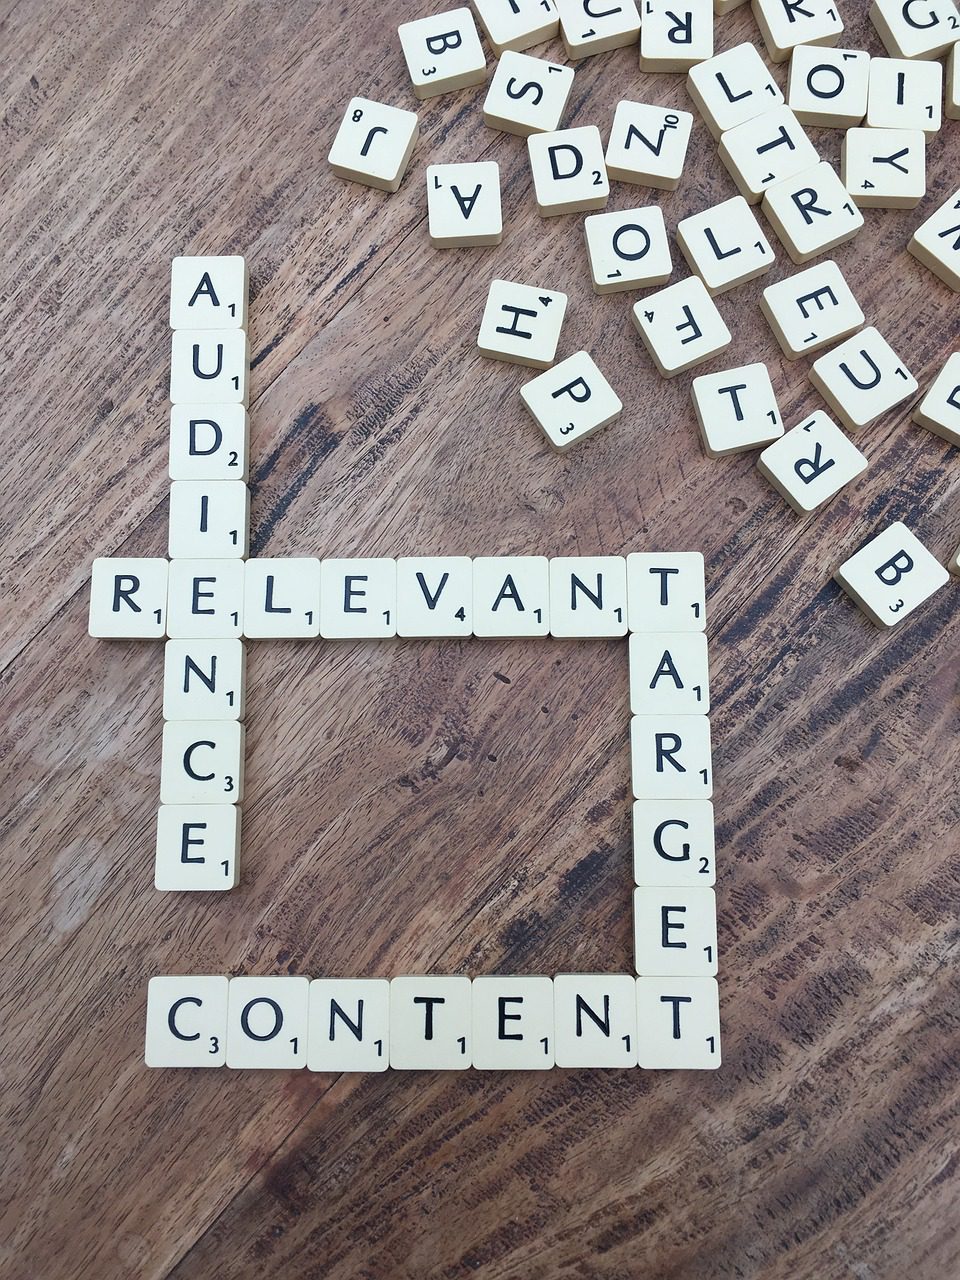 The Power of Content Marketing